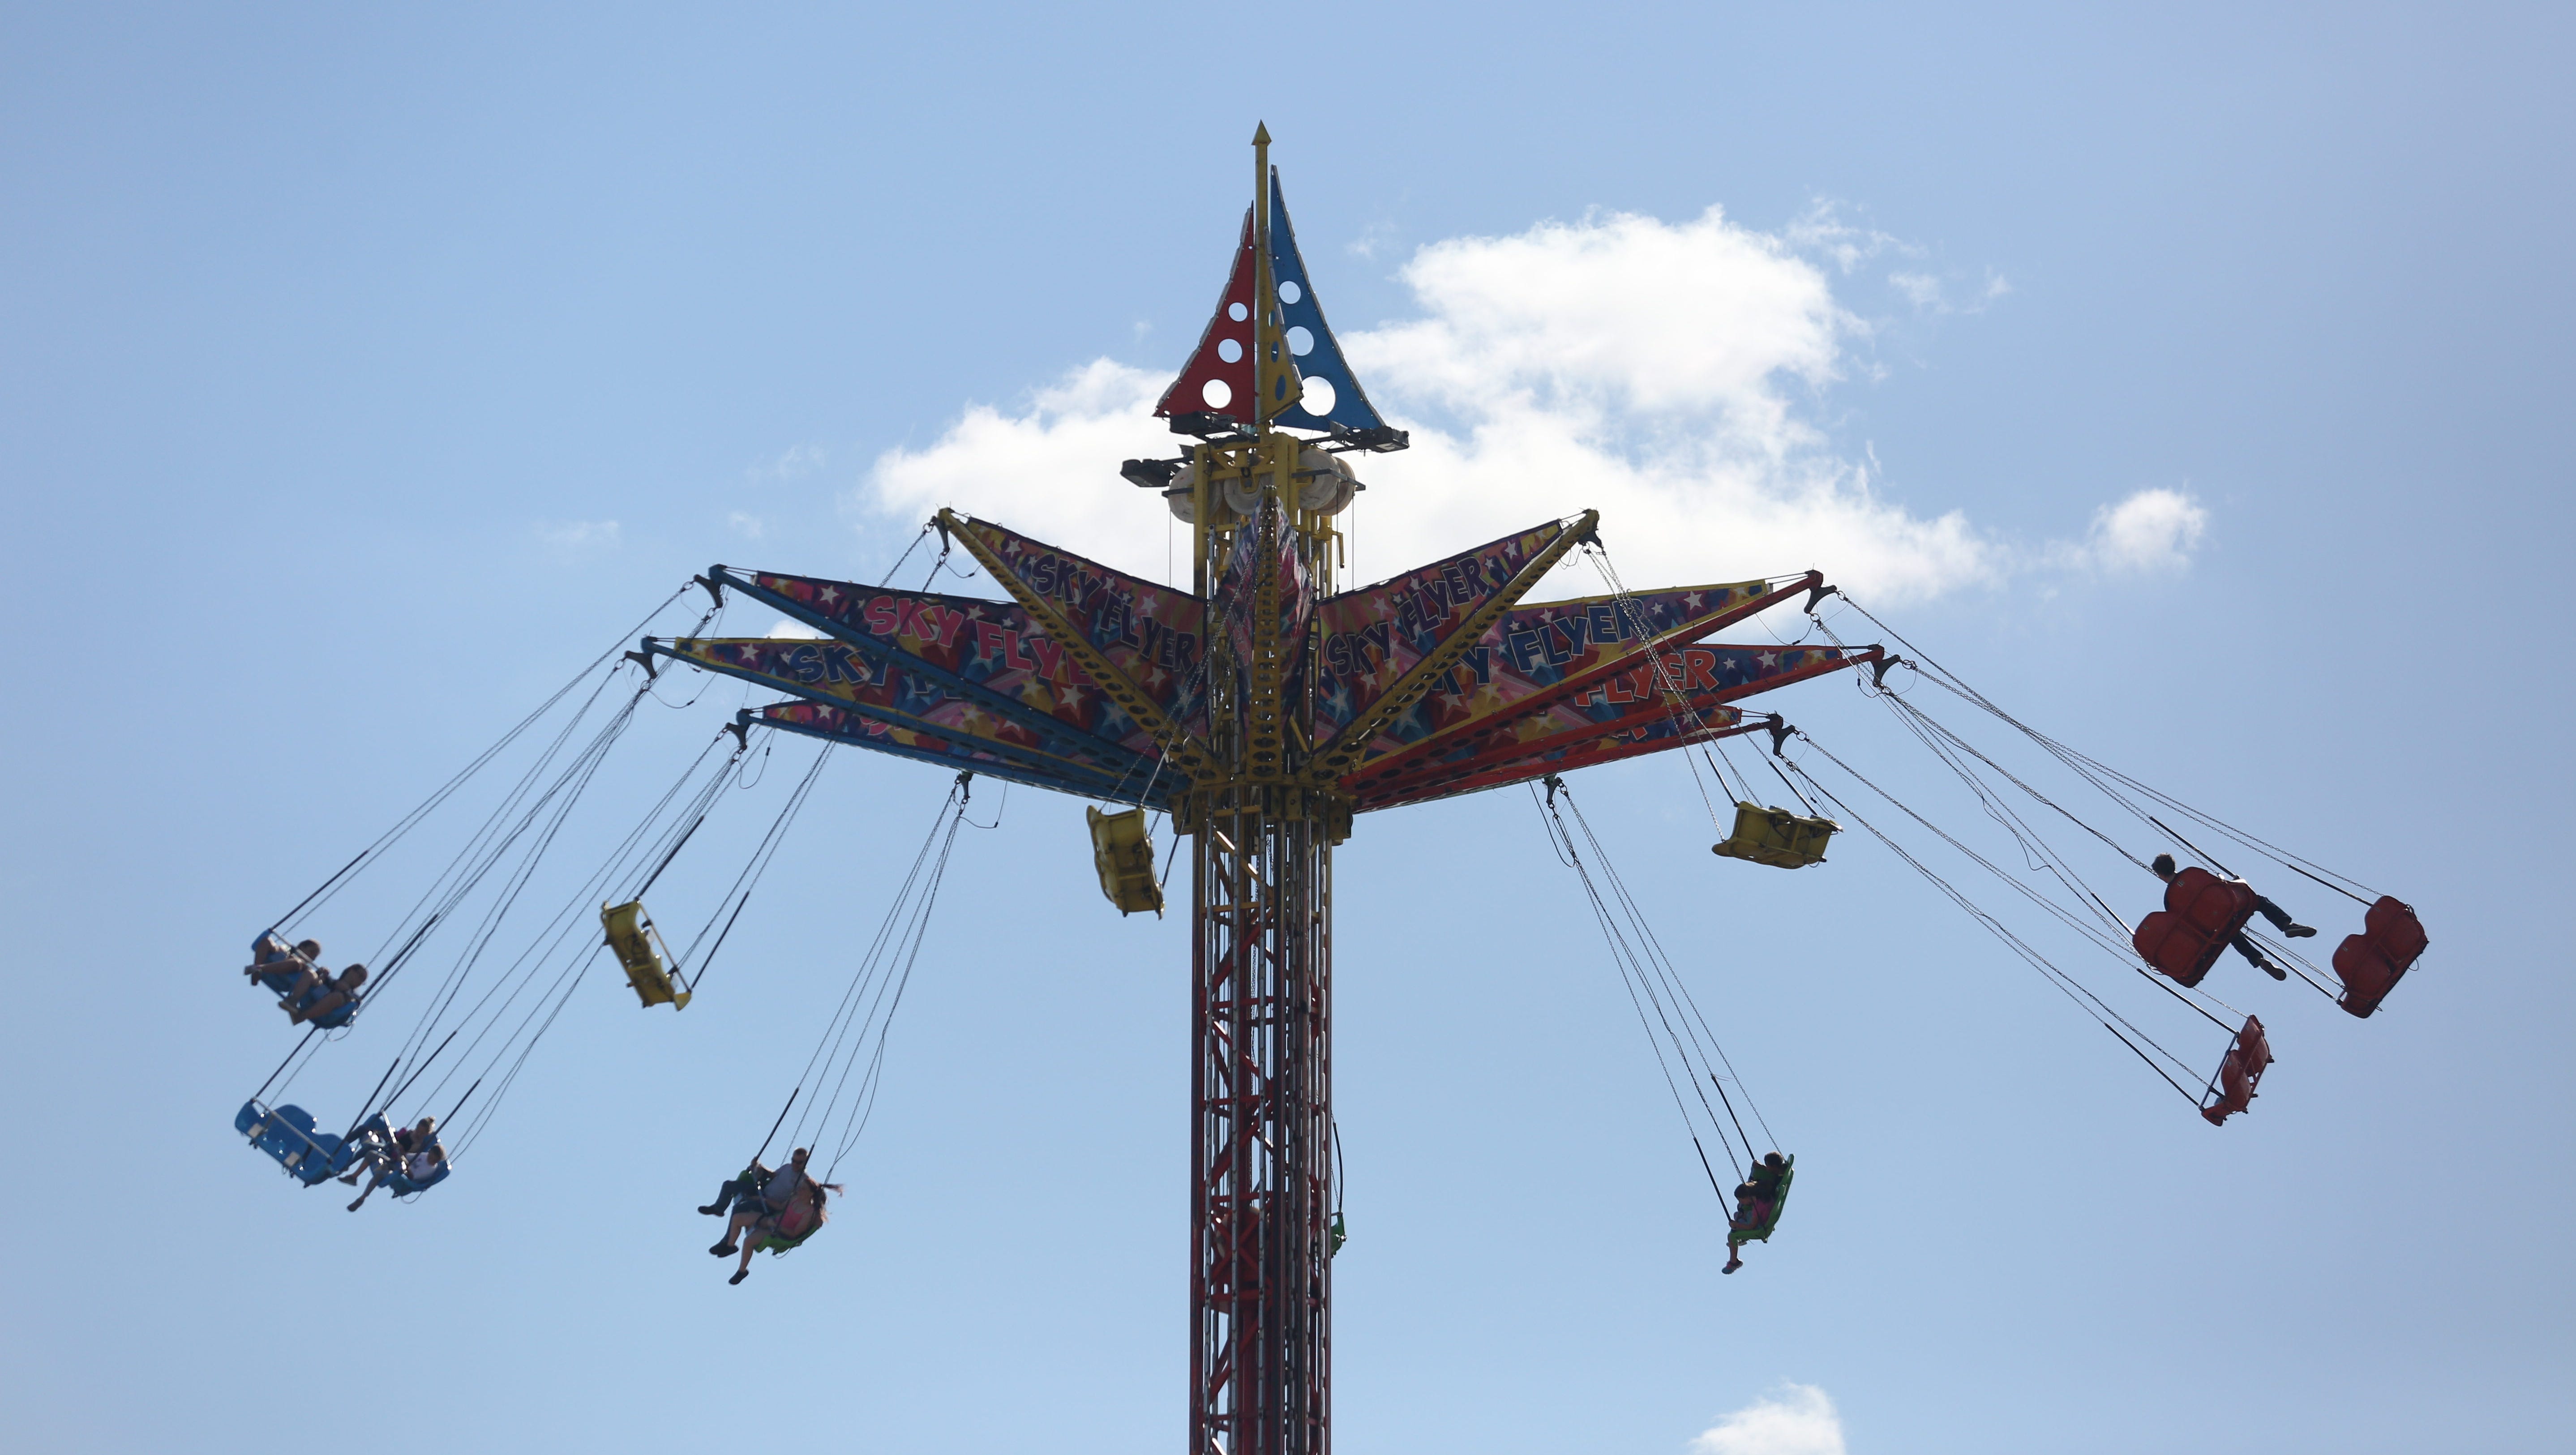 Lee County Fair in Fort Myers: Tickets, rides, food, specials, etc.